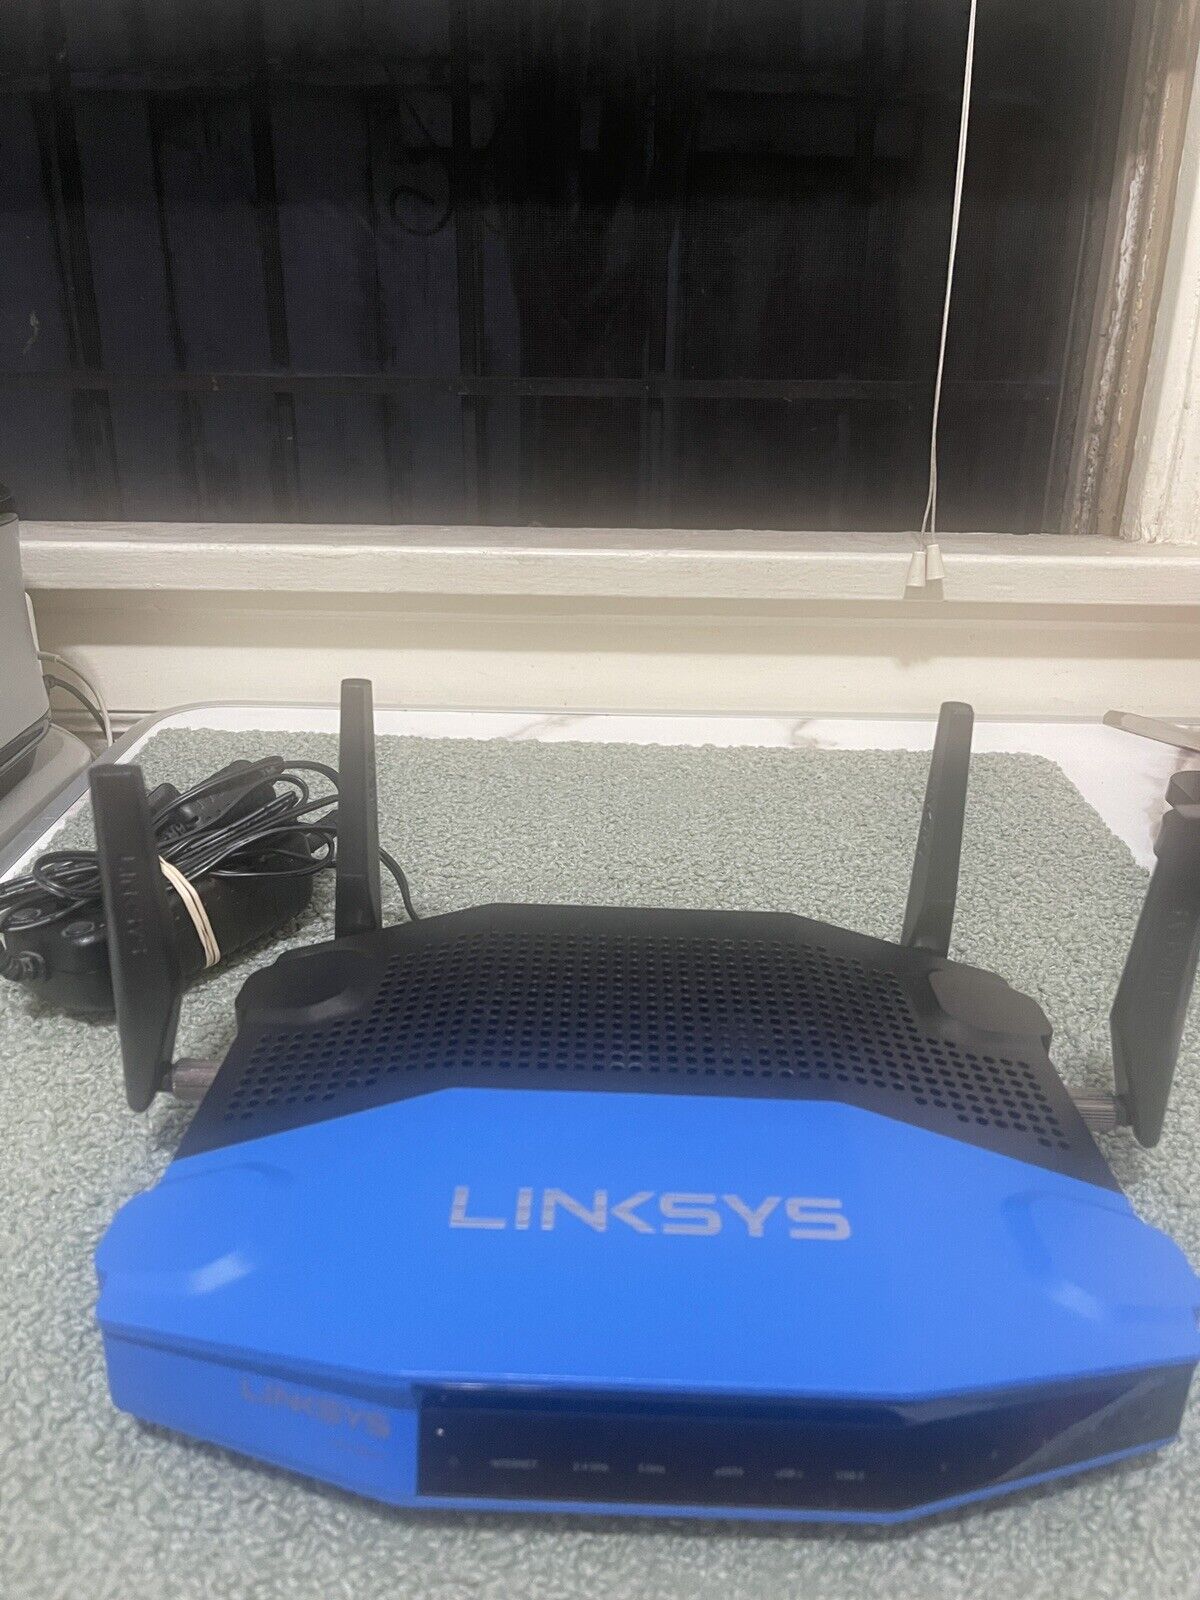 Linksys WRT1900AC AC1900 Dual-Band WiFi Router CLEAN